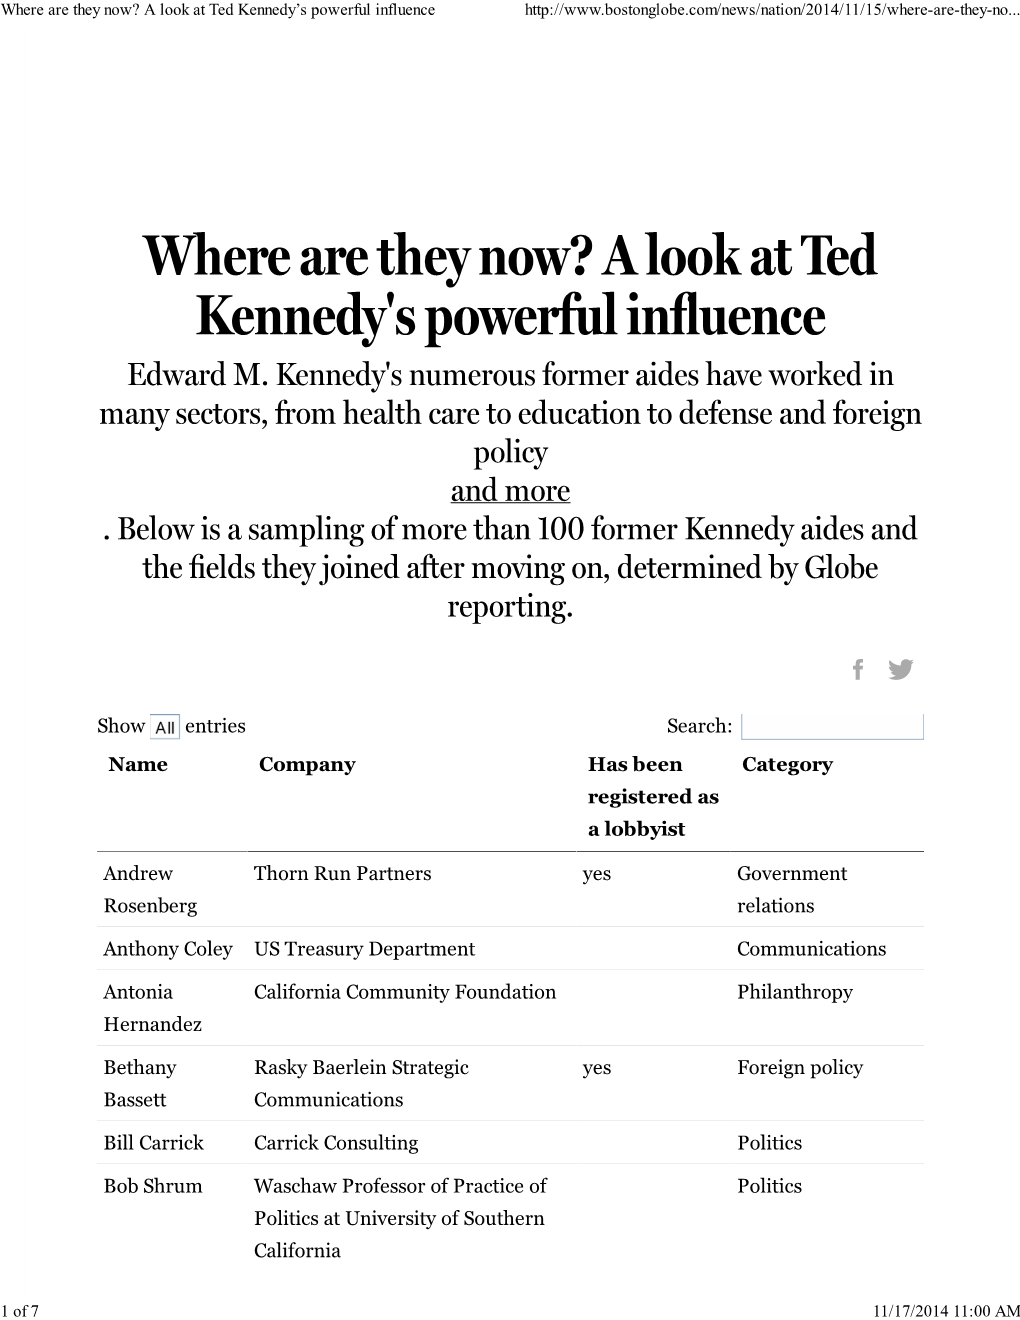 A Look at Ted Kennedy's Powerful Influence